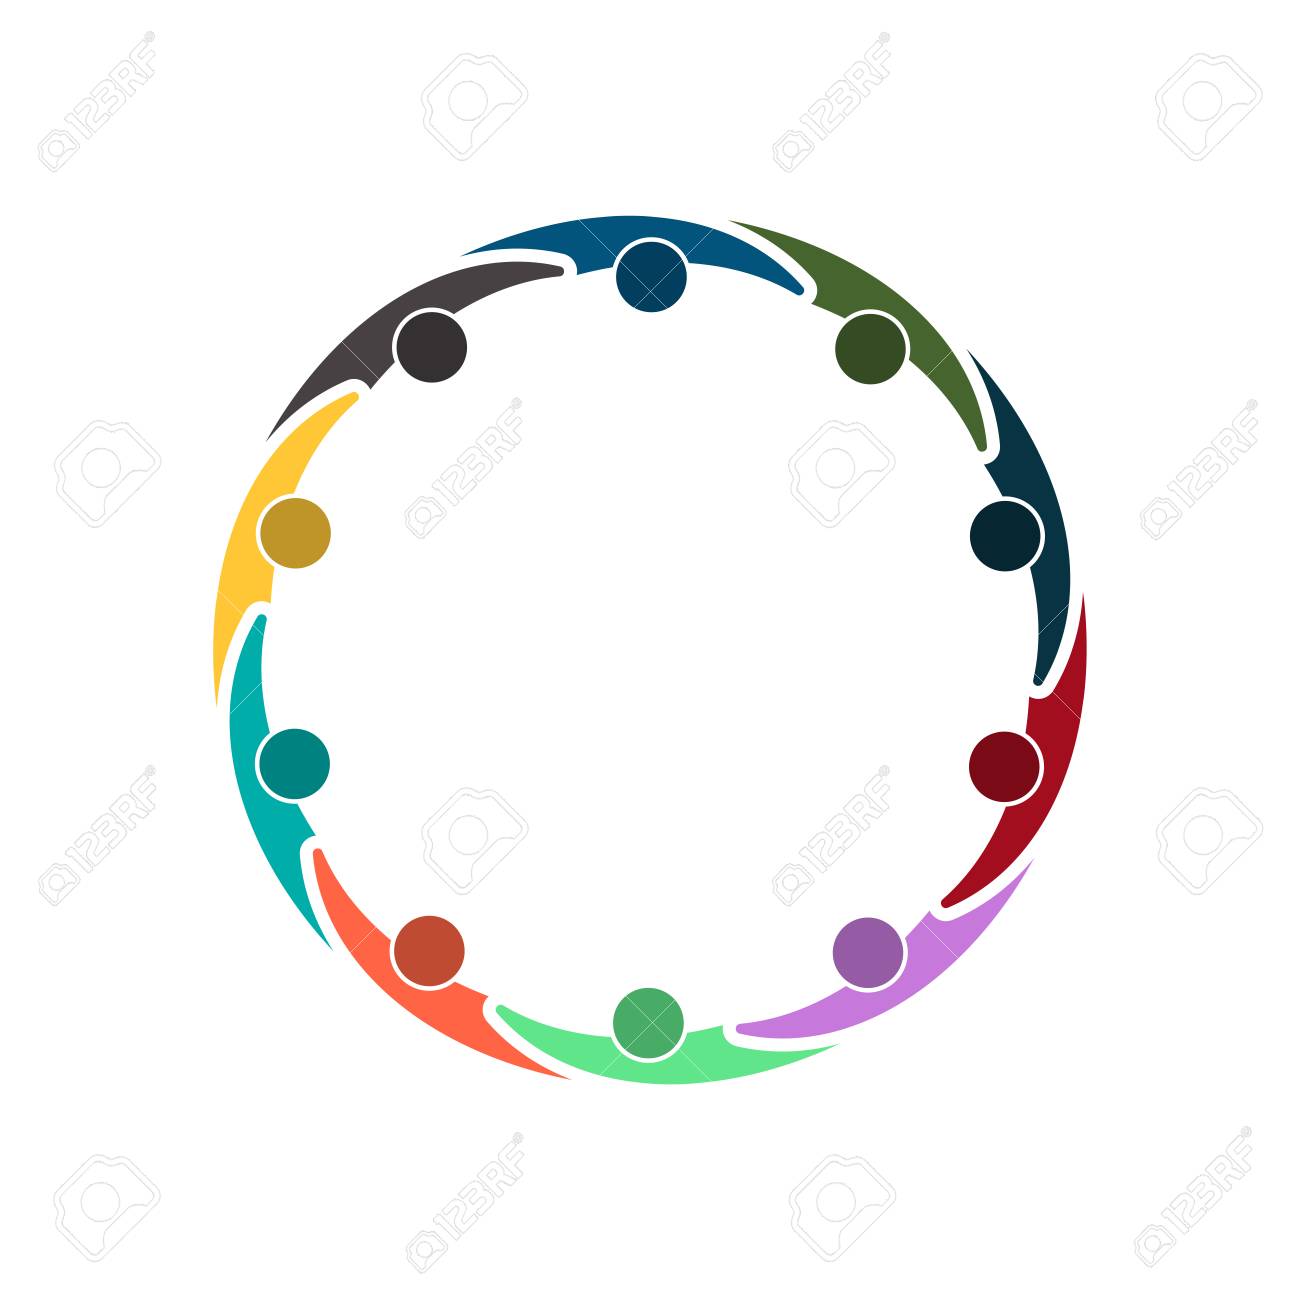 People Holding Hands In A Circle Clipart & Free Clip Art Images.